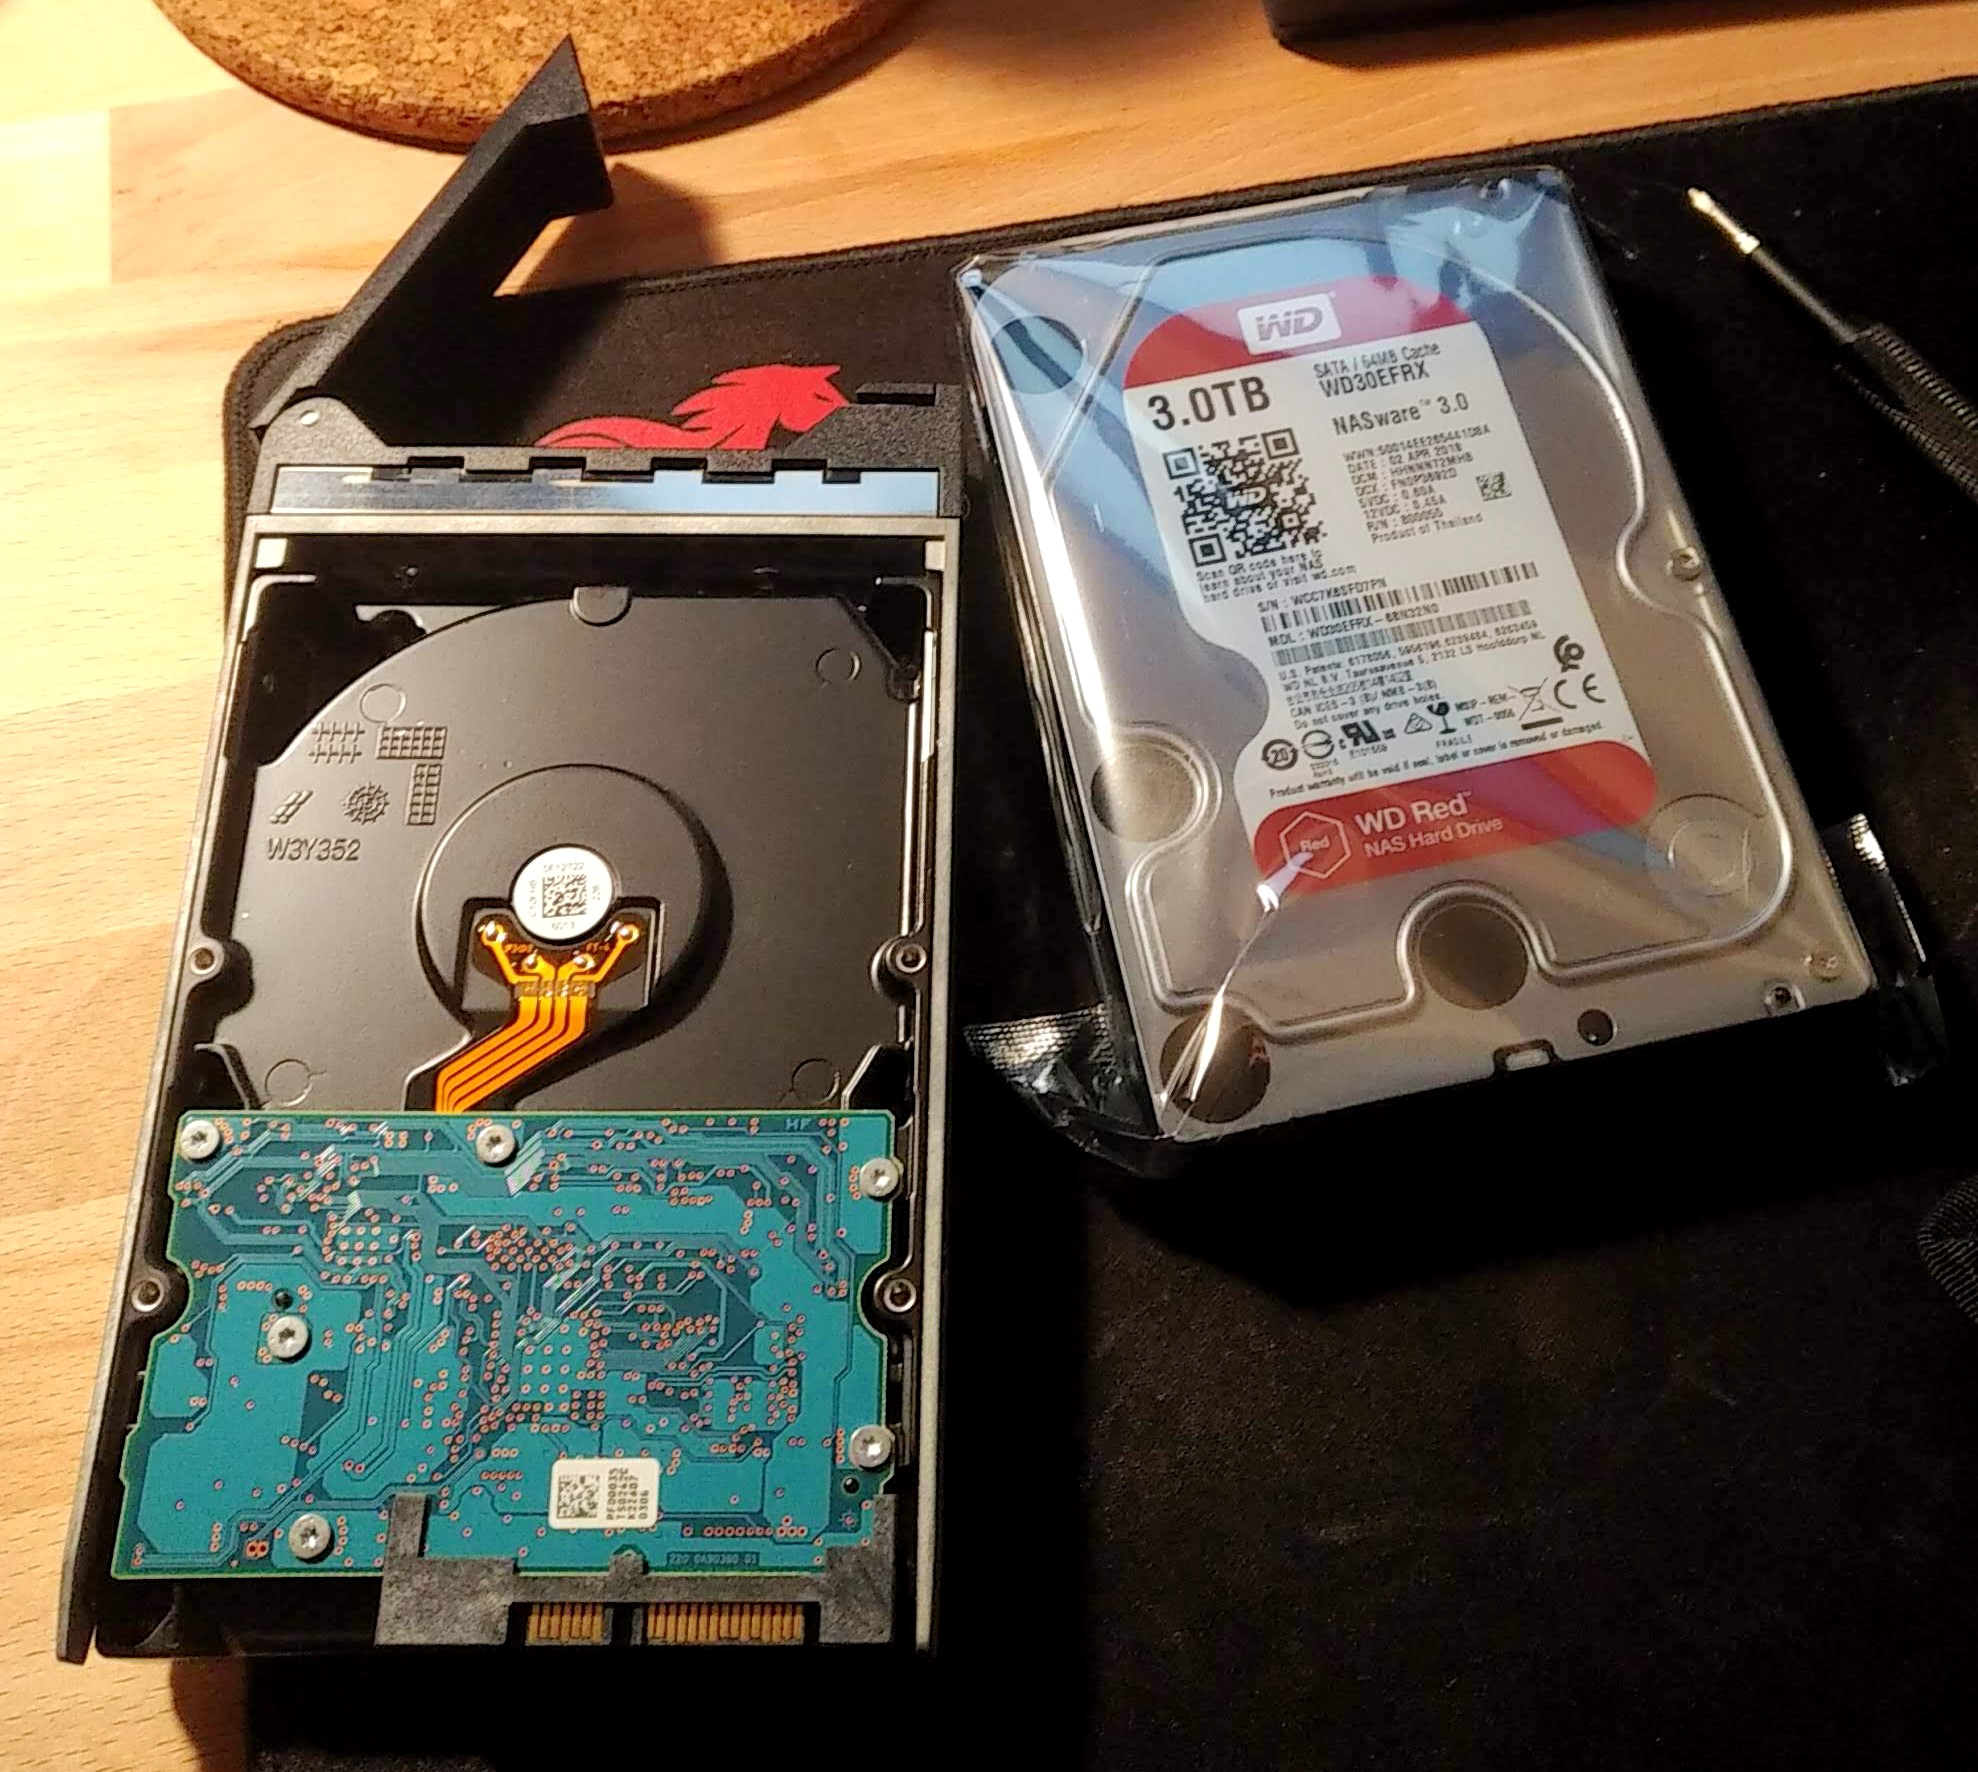 Swapping the two hard drives